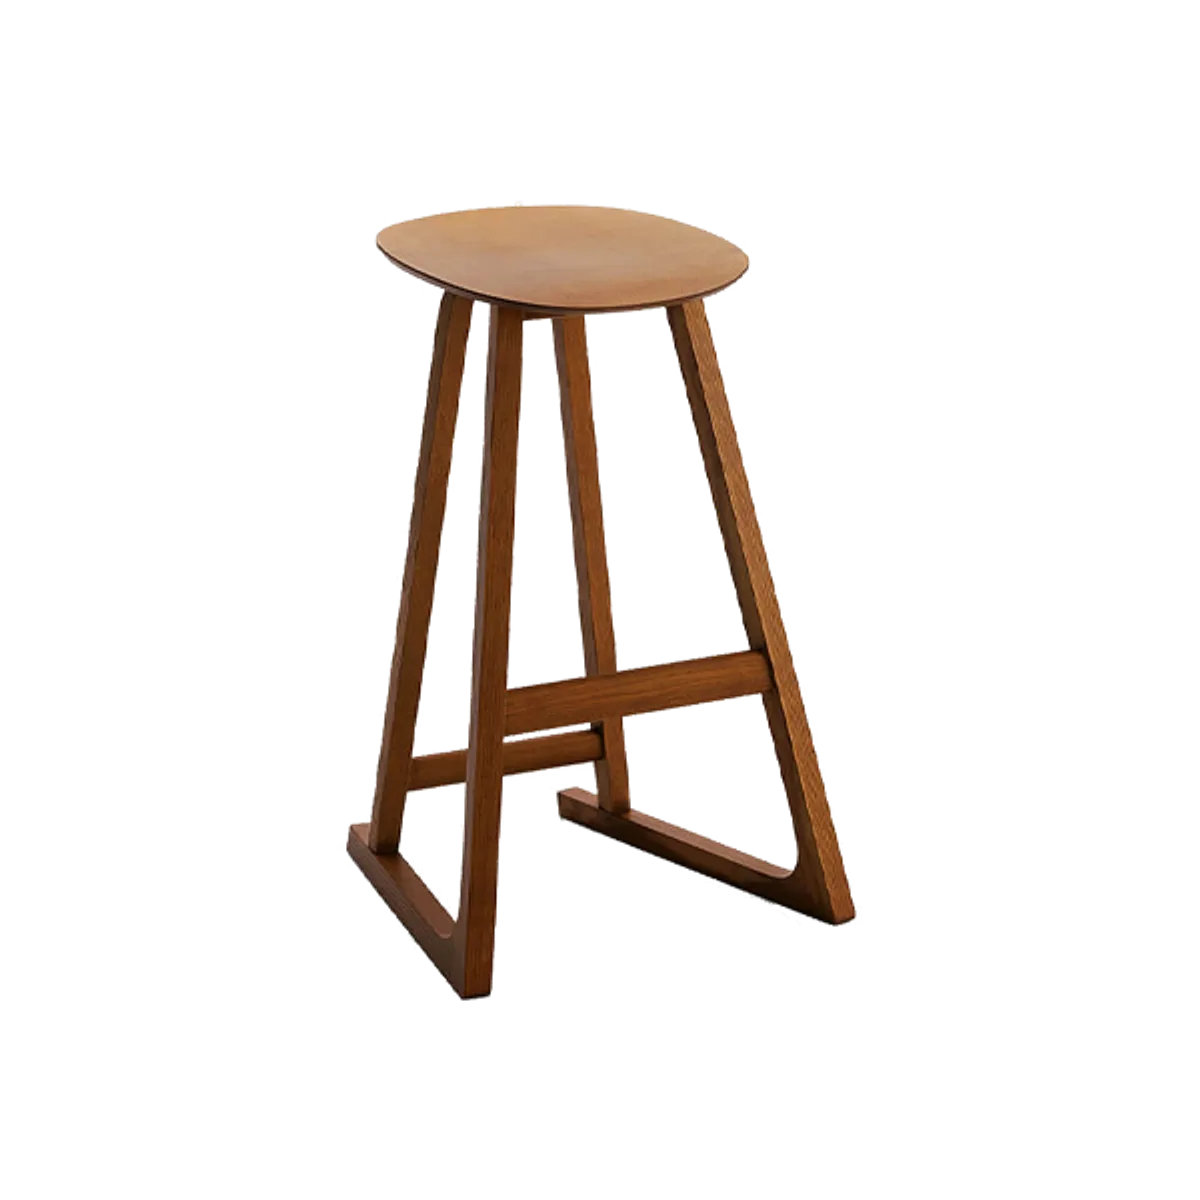 Sprint stool Insideout Contracts